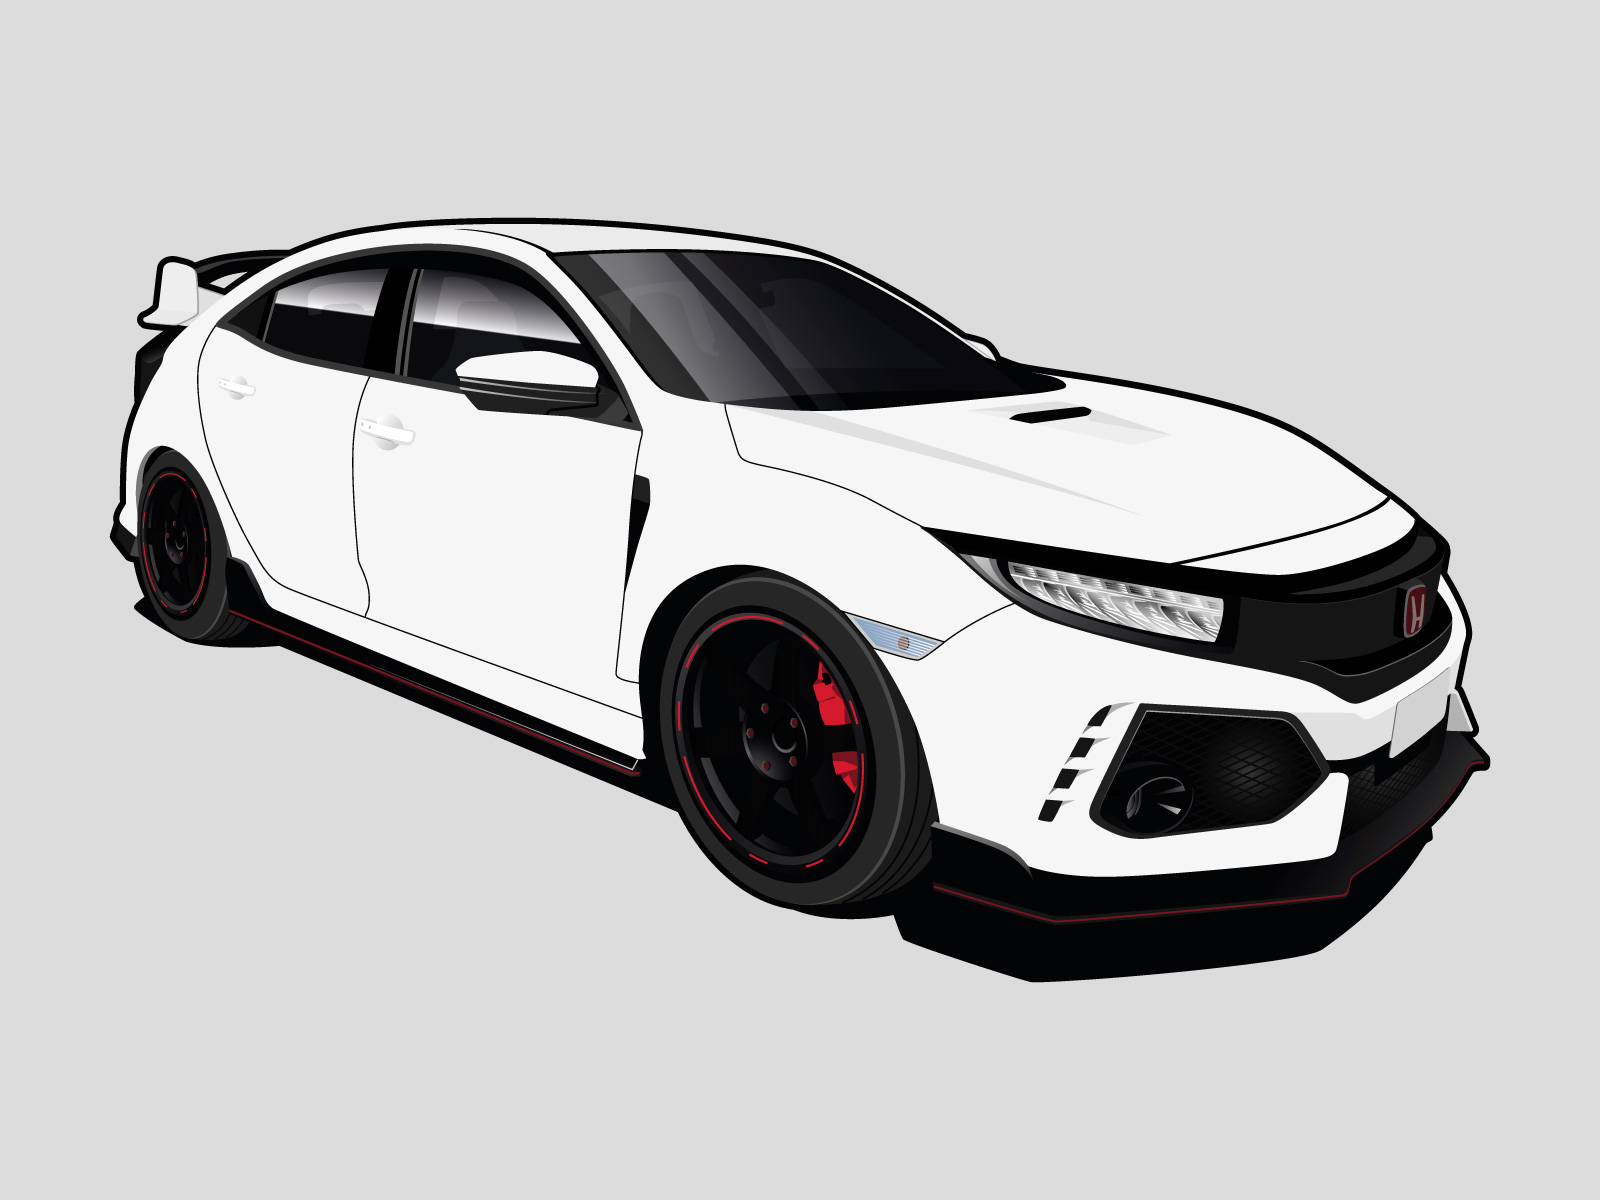 Honda Civic Type R Illustration by Forged Rides on Dribbble